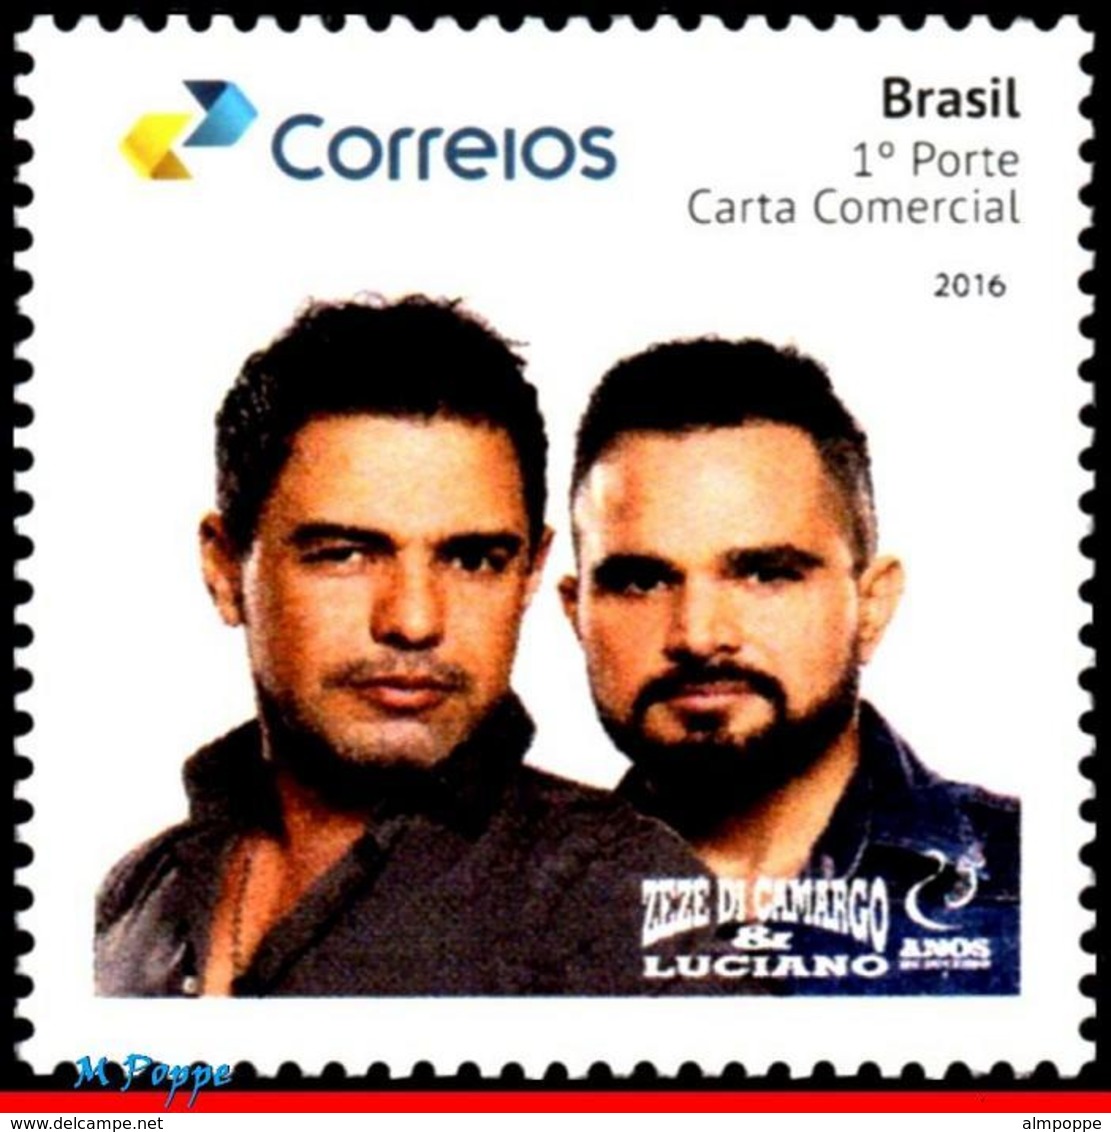 Ref. BR-V2016-28 BRAZIL 2016 FAMOUS PEOPLE, SINGERS, MUSICIANS, ZEZE, DI CARMARGO & LUCIANO, PERSONALIZED MNH 1V - Nuevos